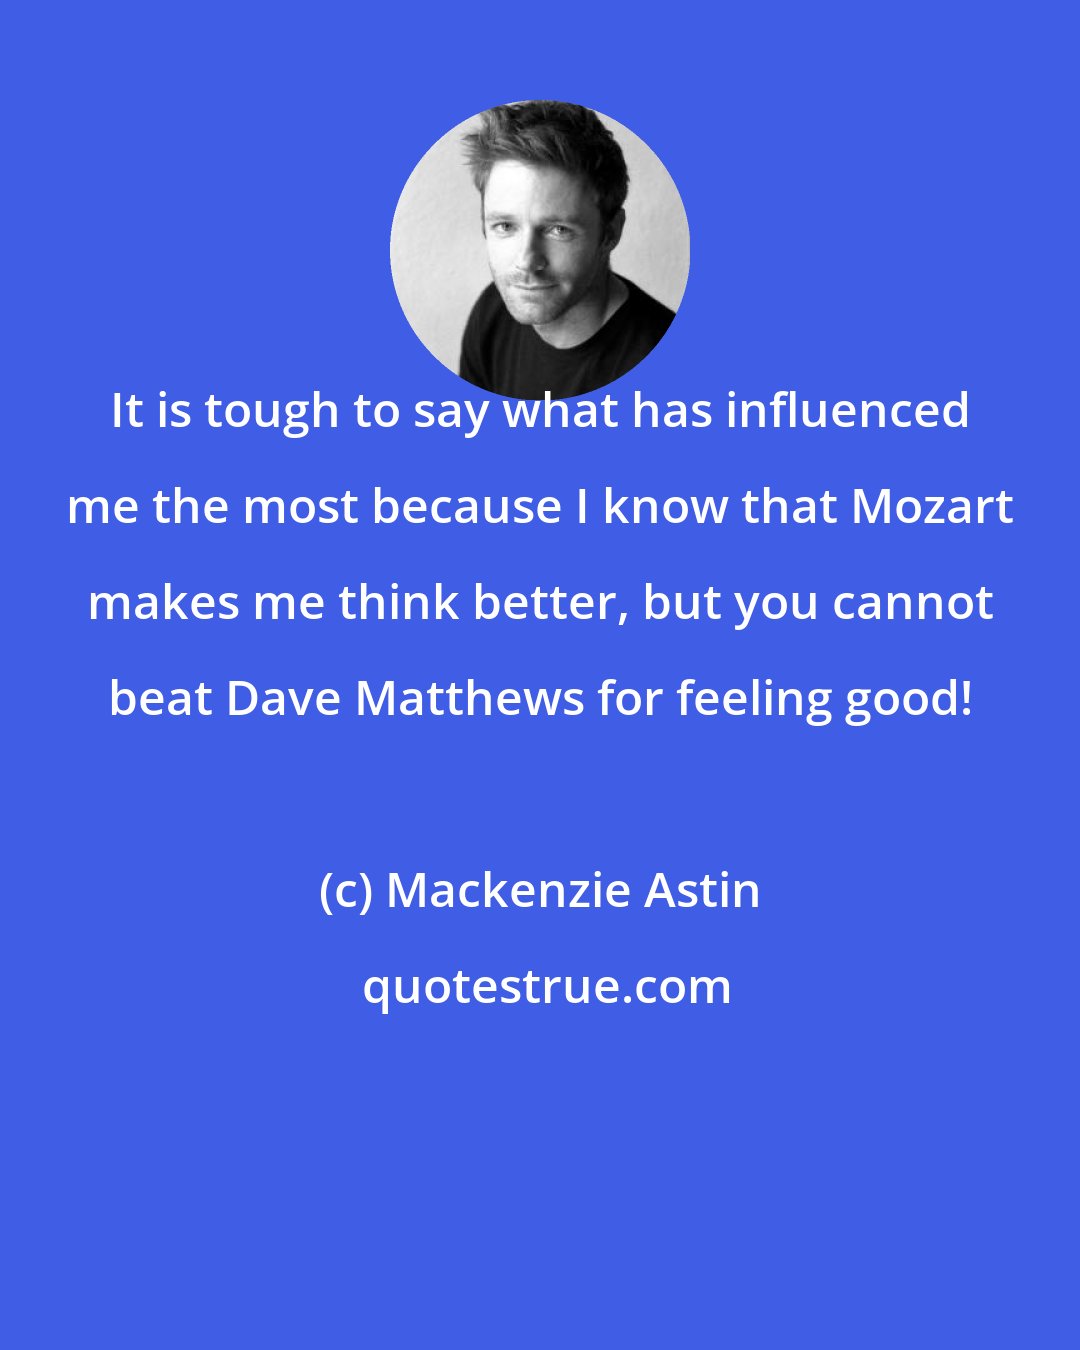 Mackenzie Astin: It is tough to say what has influenced me the most because I know that Mozart makes me think better, but you cannot beat Dave Matthews for feeling good!